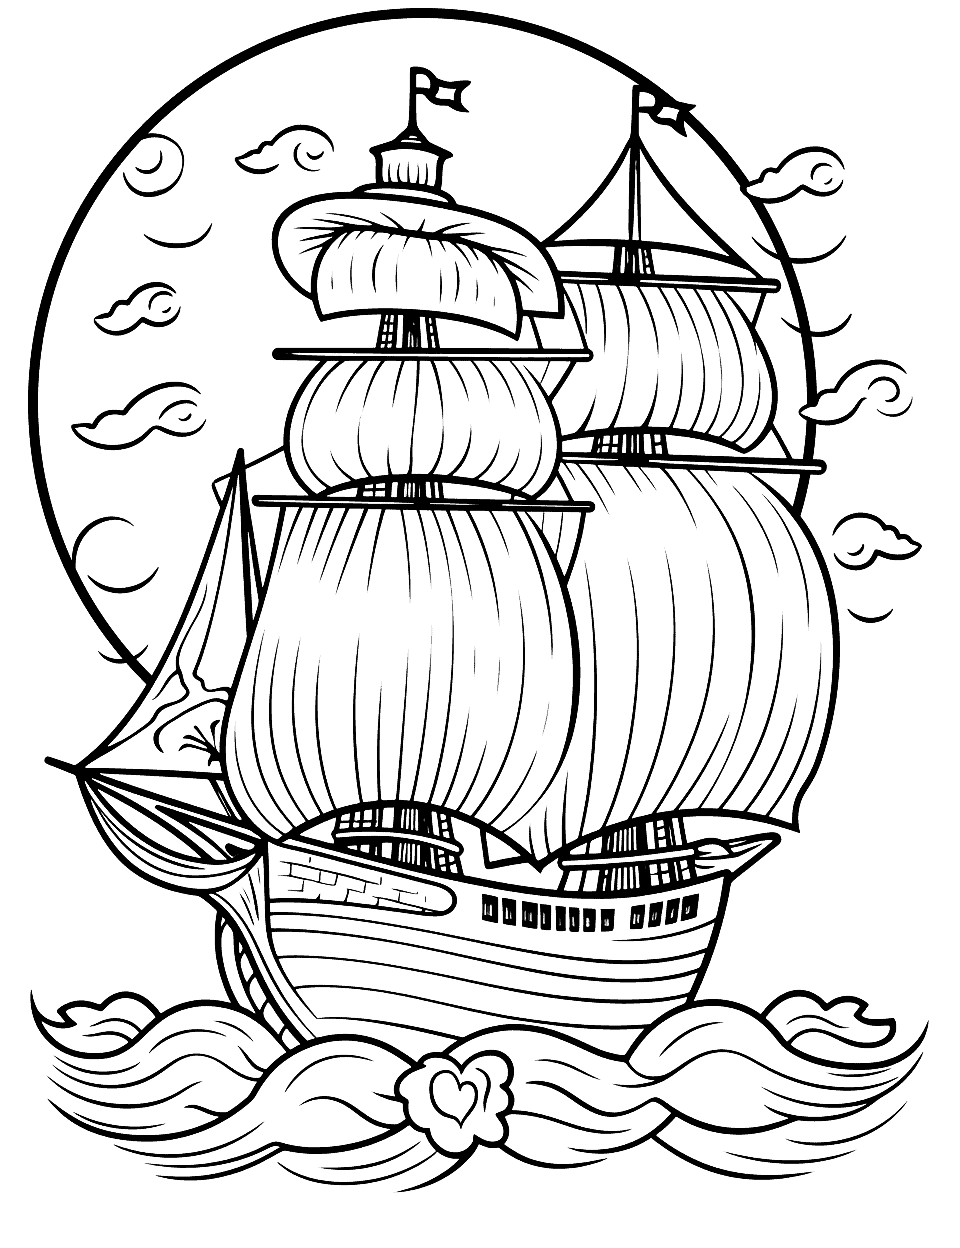 Ghostly Ship Halloween Coloring Page - A ghost pirate ship sailing on a moonlit ocean, perfect for those who enjoy intricate coloring.